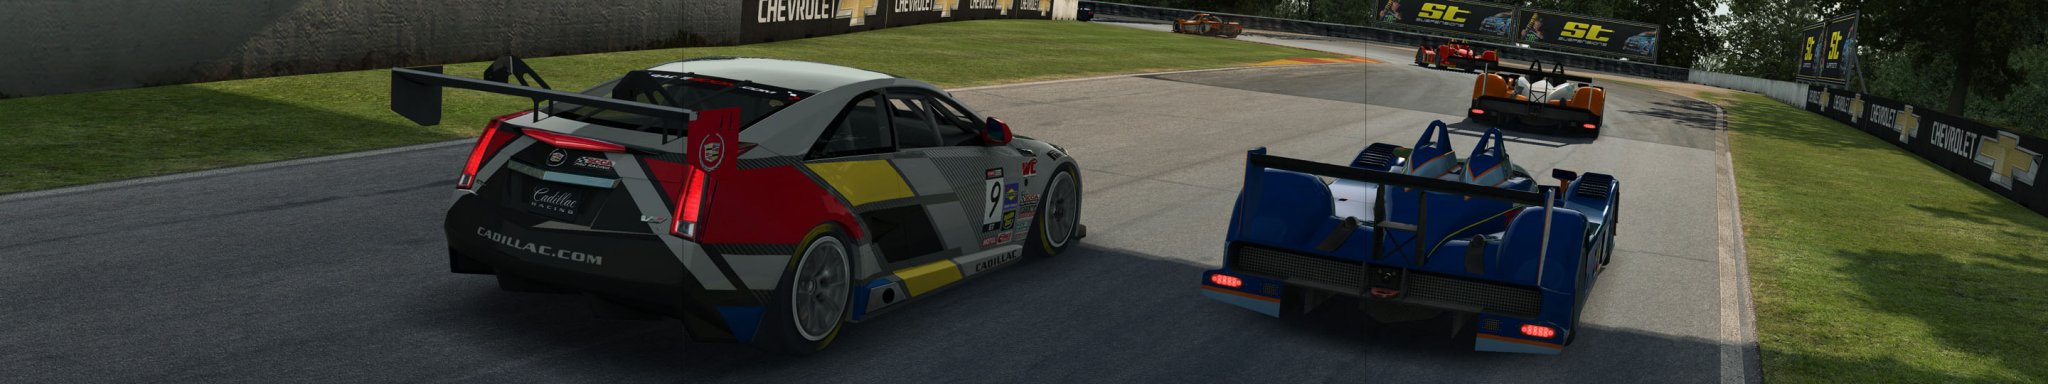 1 RACEROOM CADILLAC GT2 with P2 and 2021 DTM copy.jpg